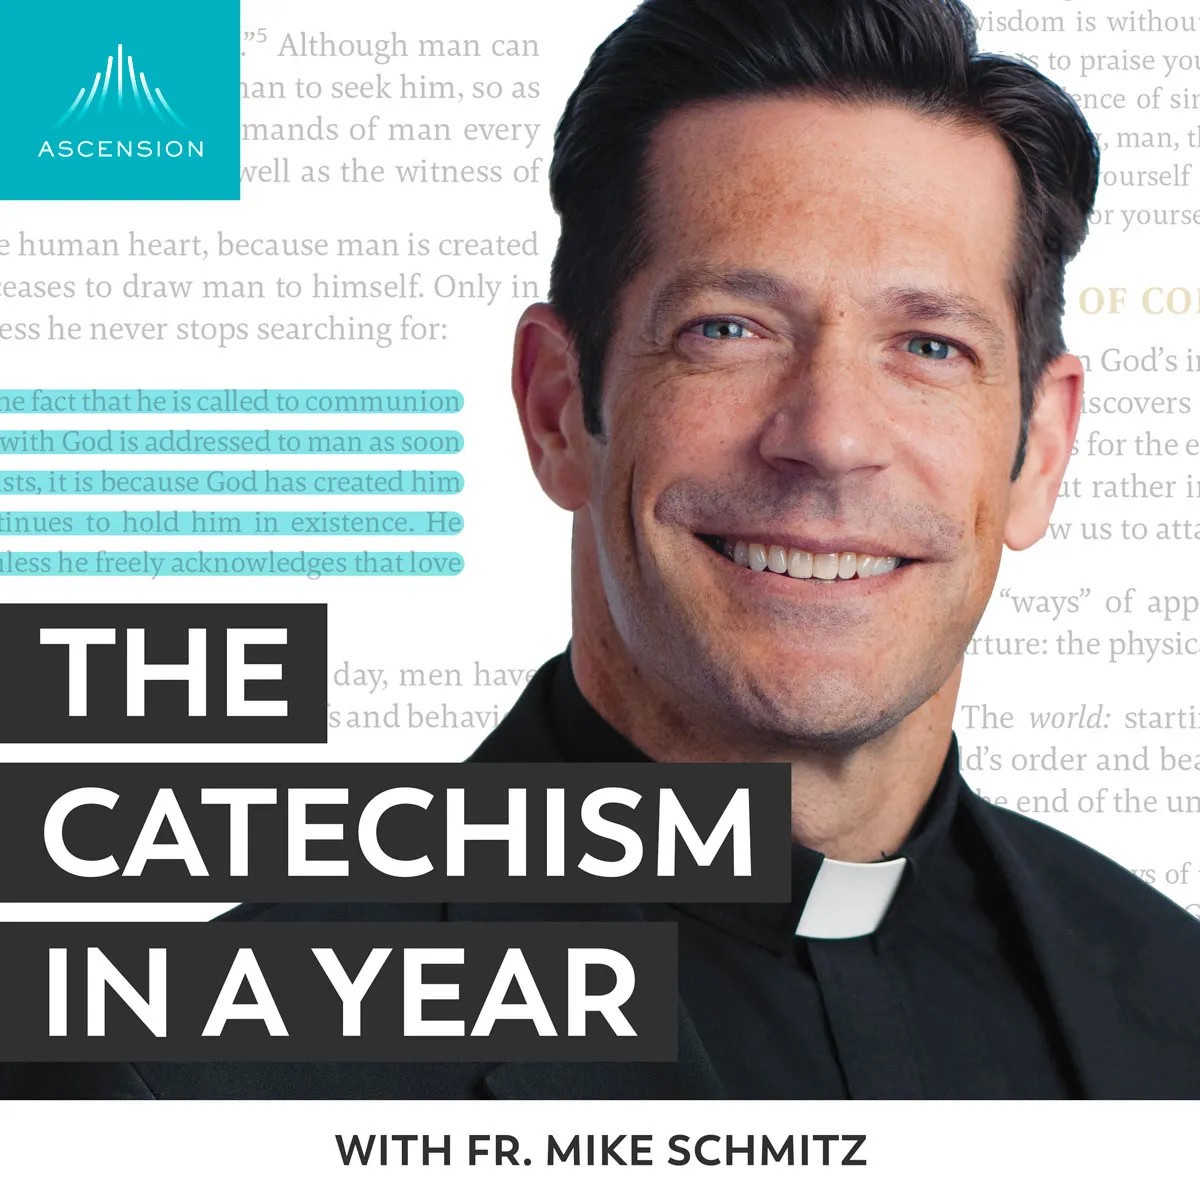 Ascension The Catechism in a Year